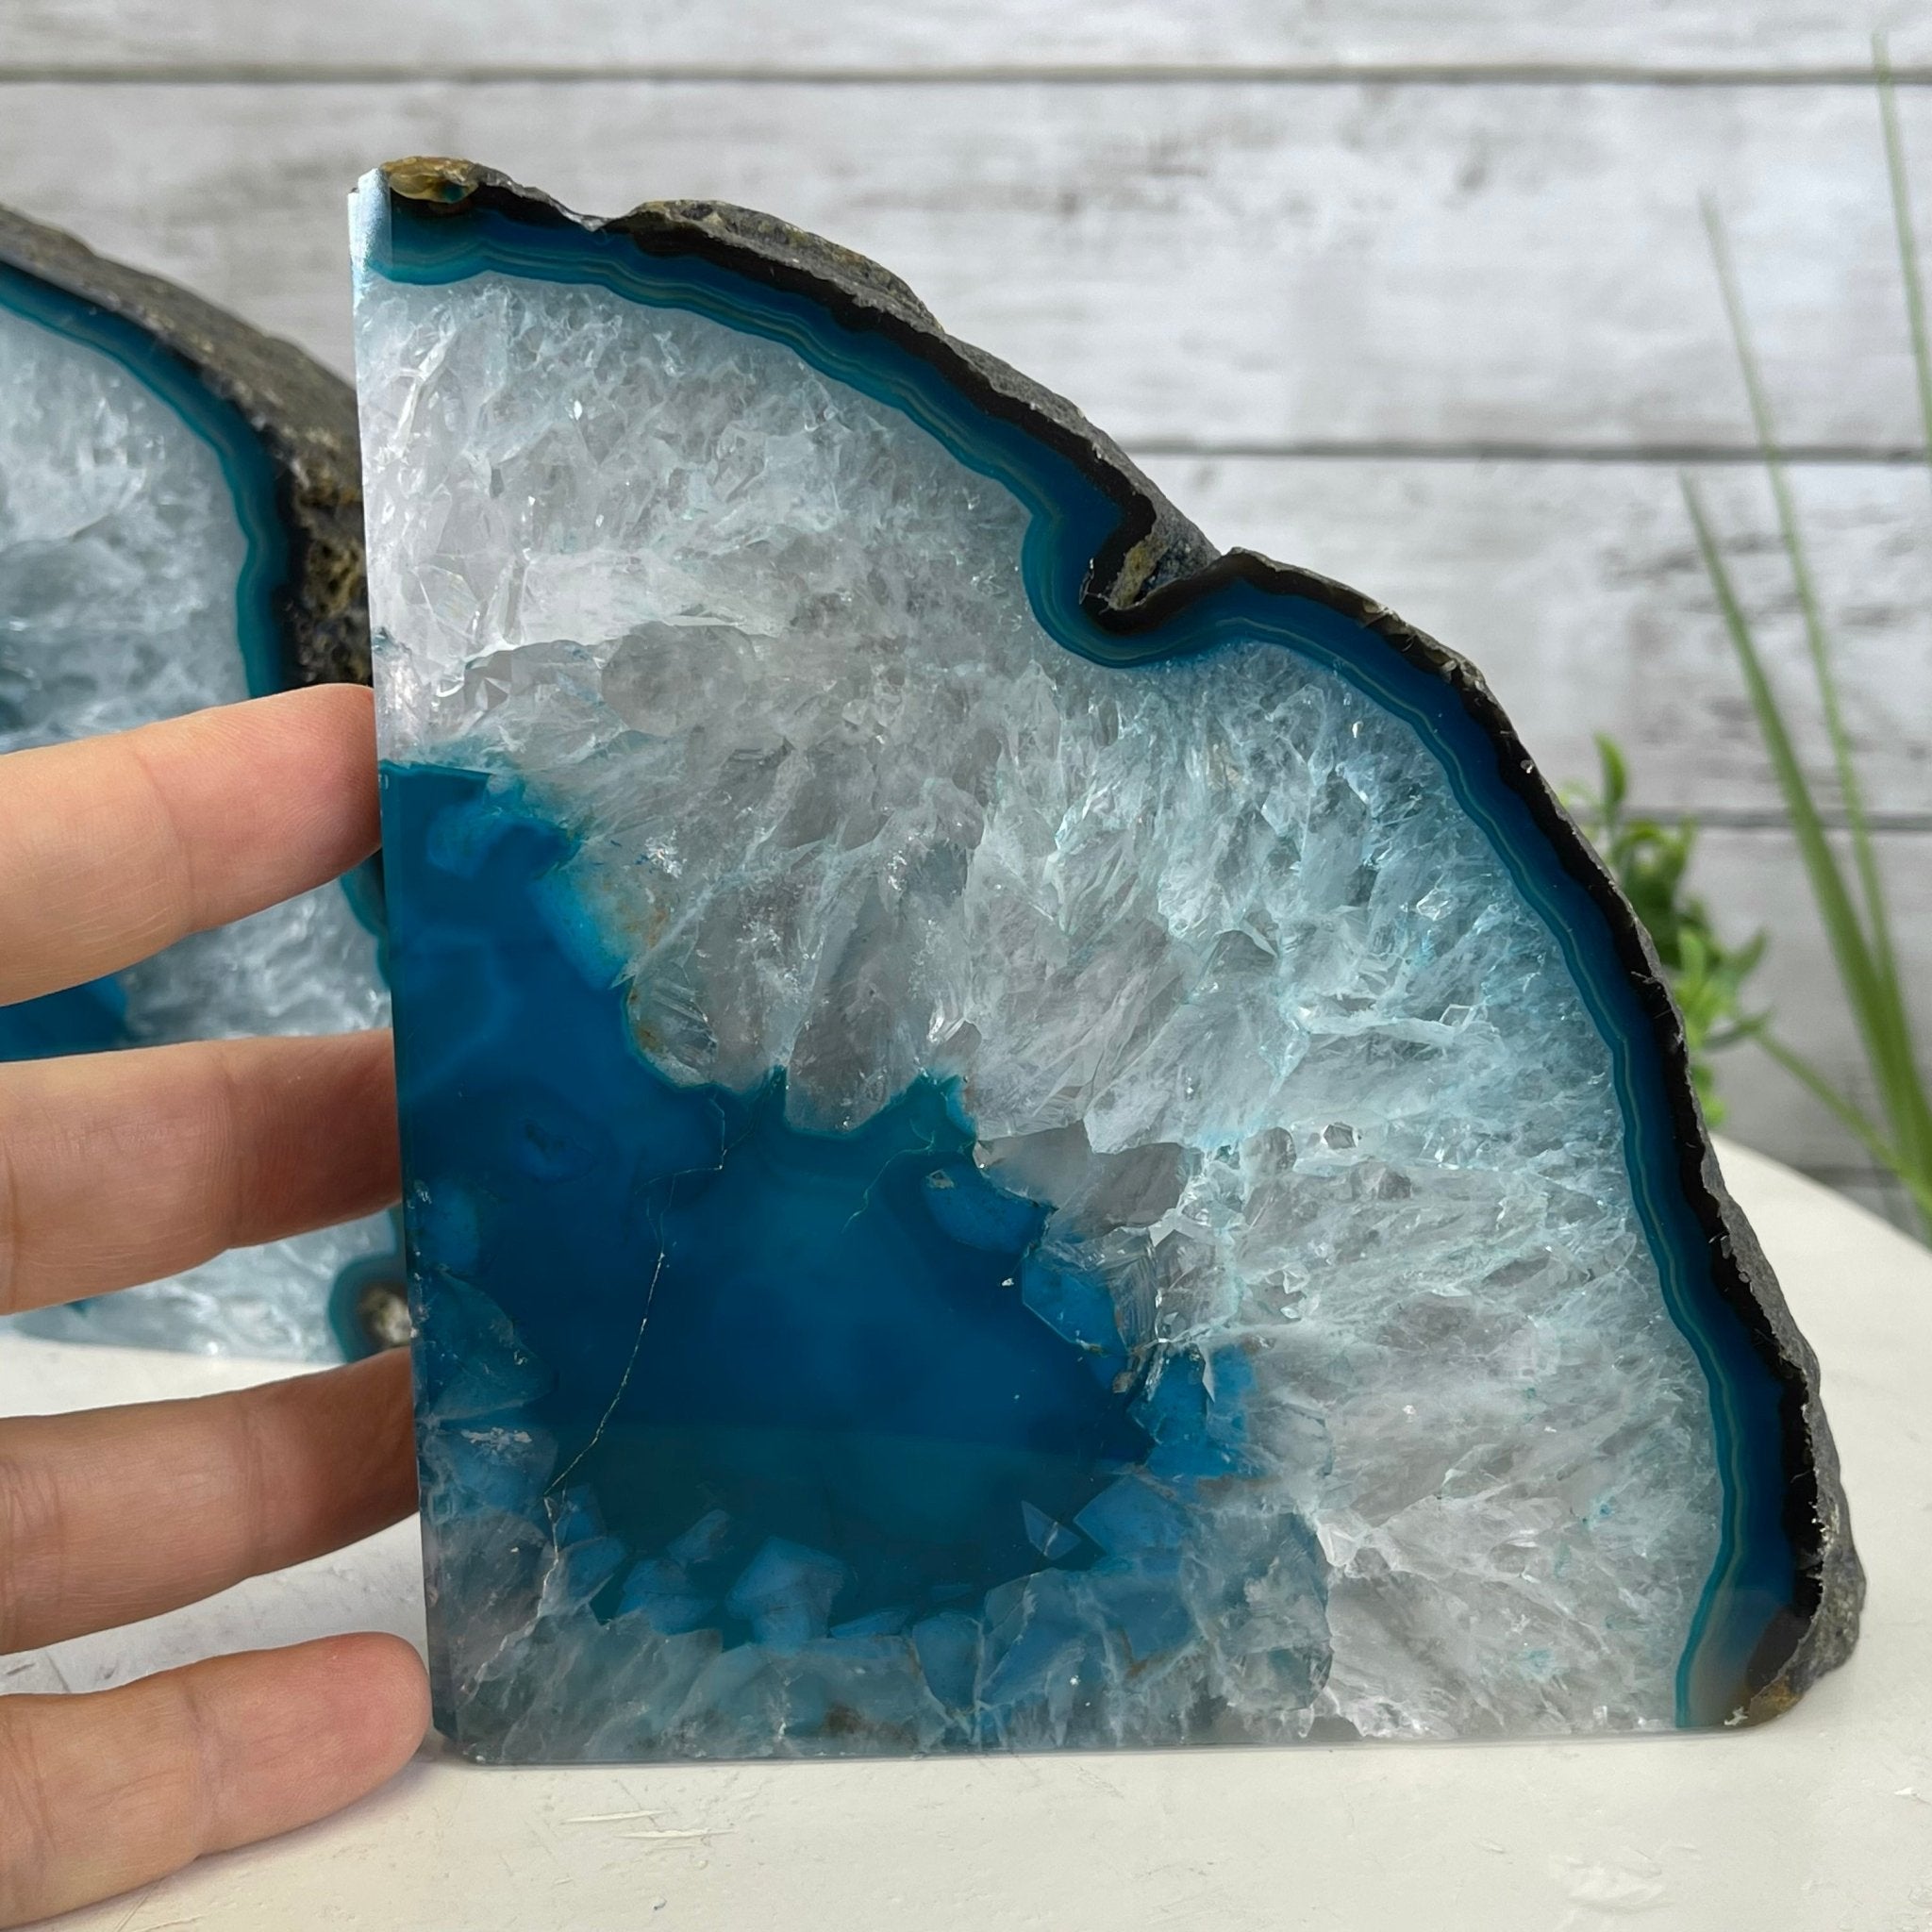 Teal Dyed Brazilian Agate Stone Bookends, 9.4 lbs & 5.3" tall Model #5151TL-021 by Brazil Gems - Brazil GemsBrazil GemsTeal Dyed Brazilian Agate Stone Bookends, 9.4 lbs & 5.3" tall Model #5151TL-021 by Brazil GemsBookends5151TL-021